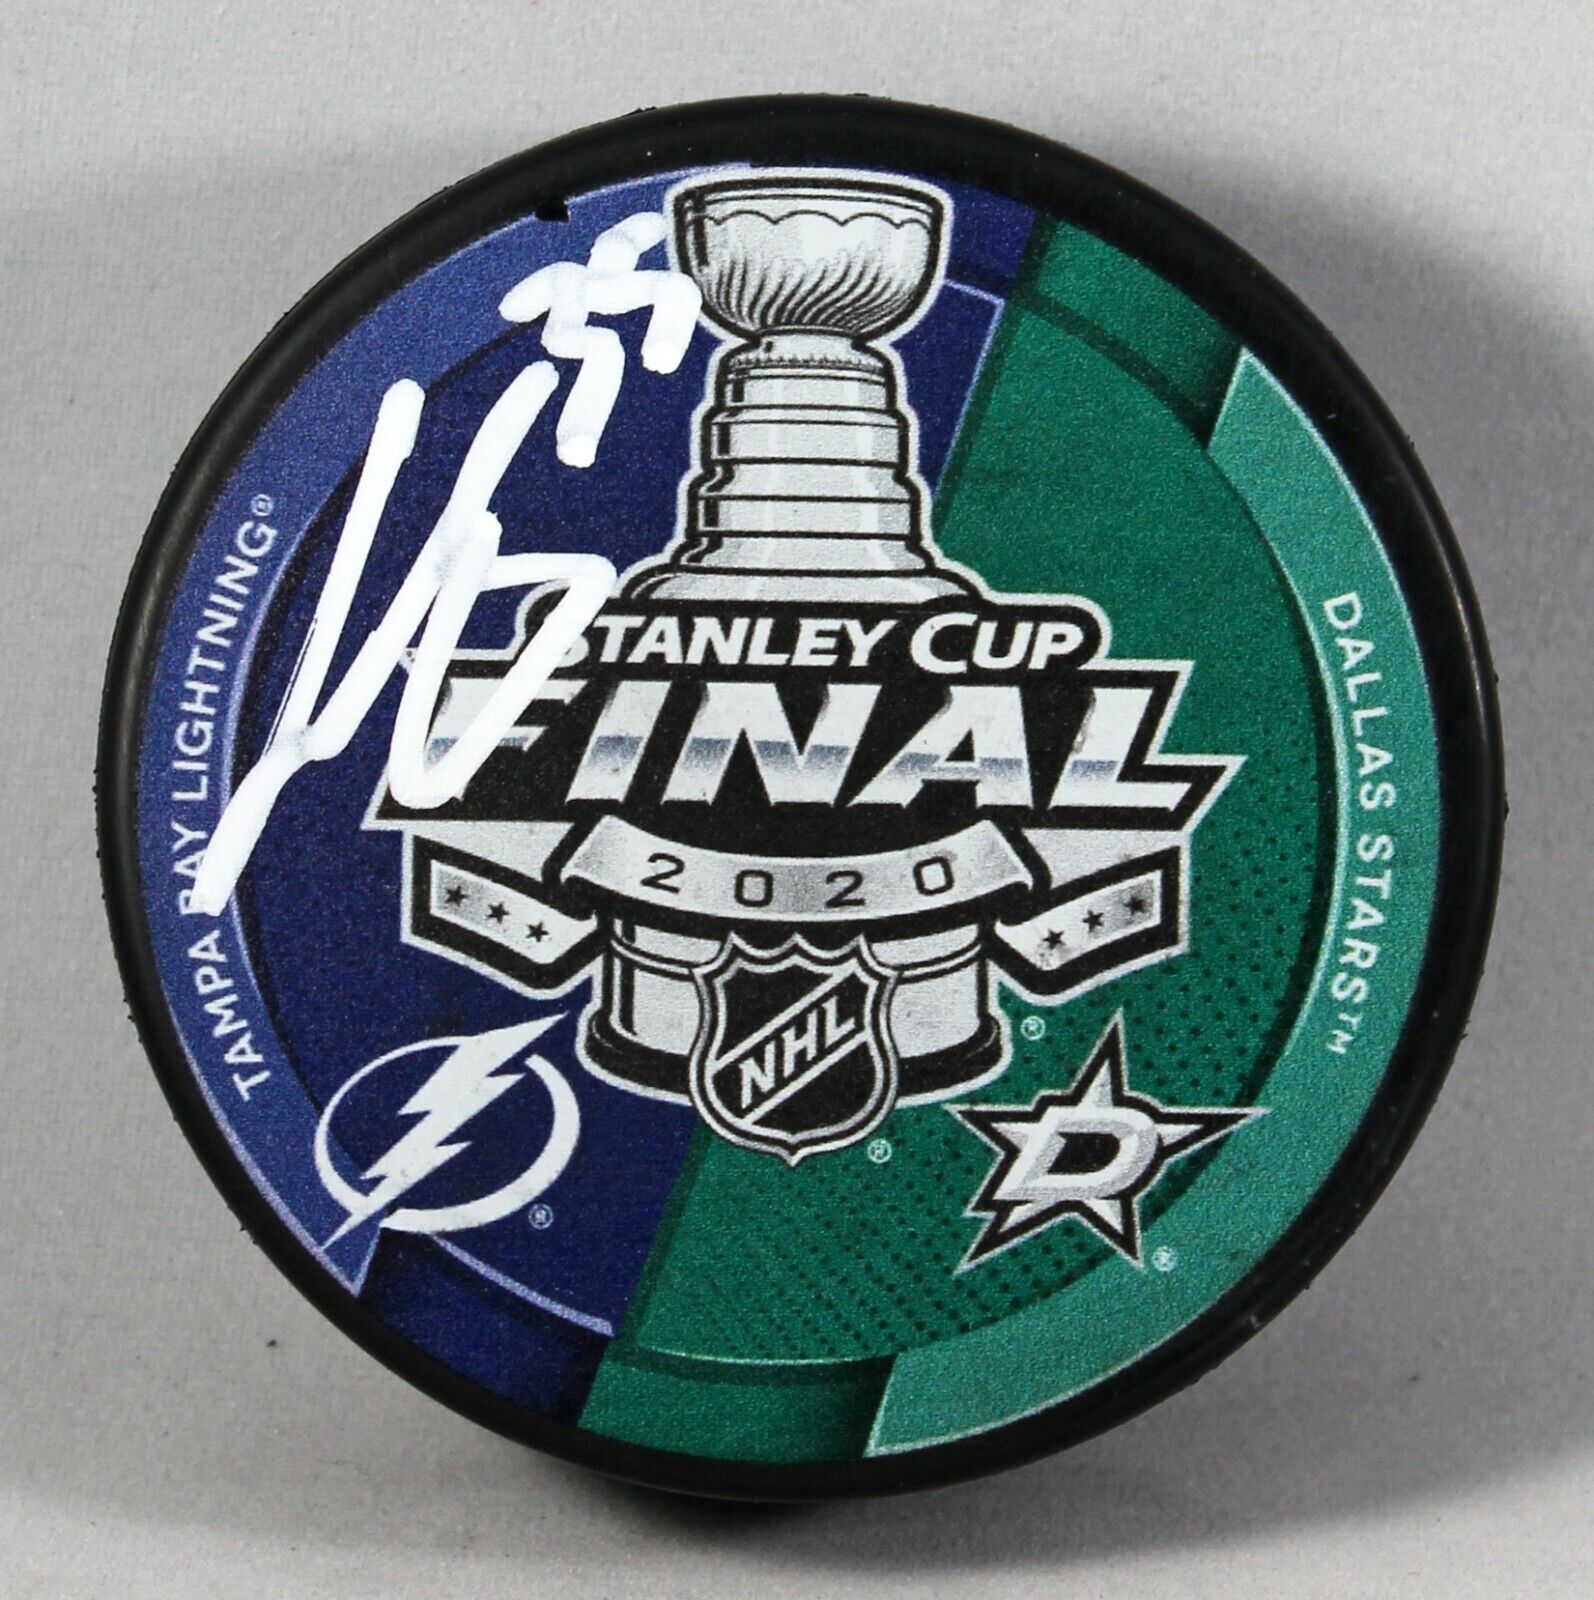 CURTIS MCELHINNEY SIGNED 2020 STANLEY CUP PUCK TAMPA BAY LIGHTNING AUTOGRAPH COA